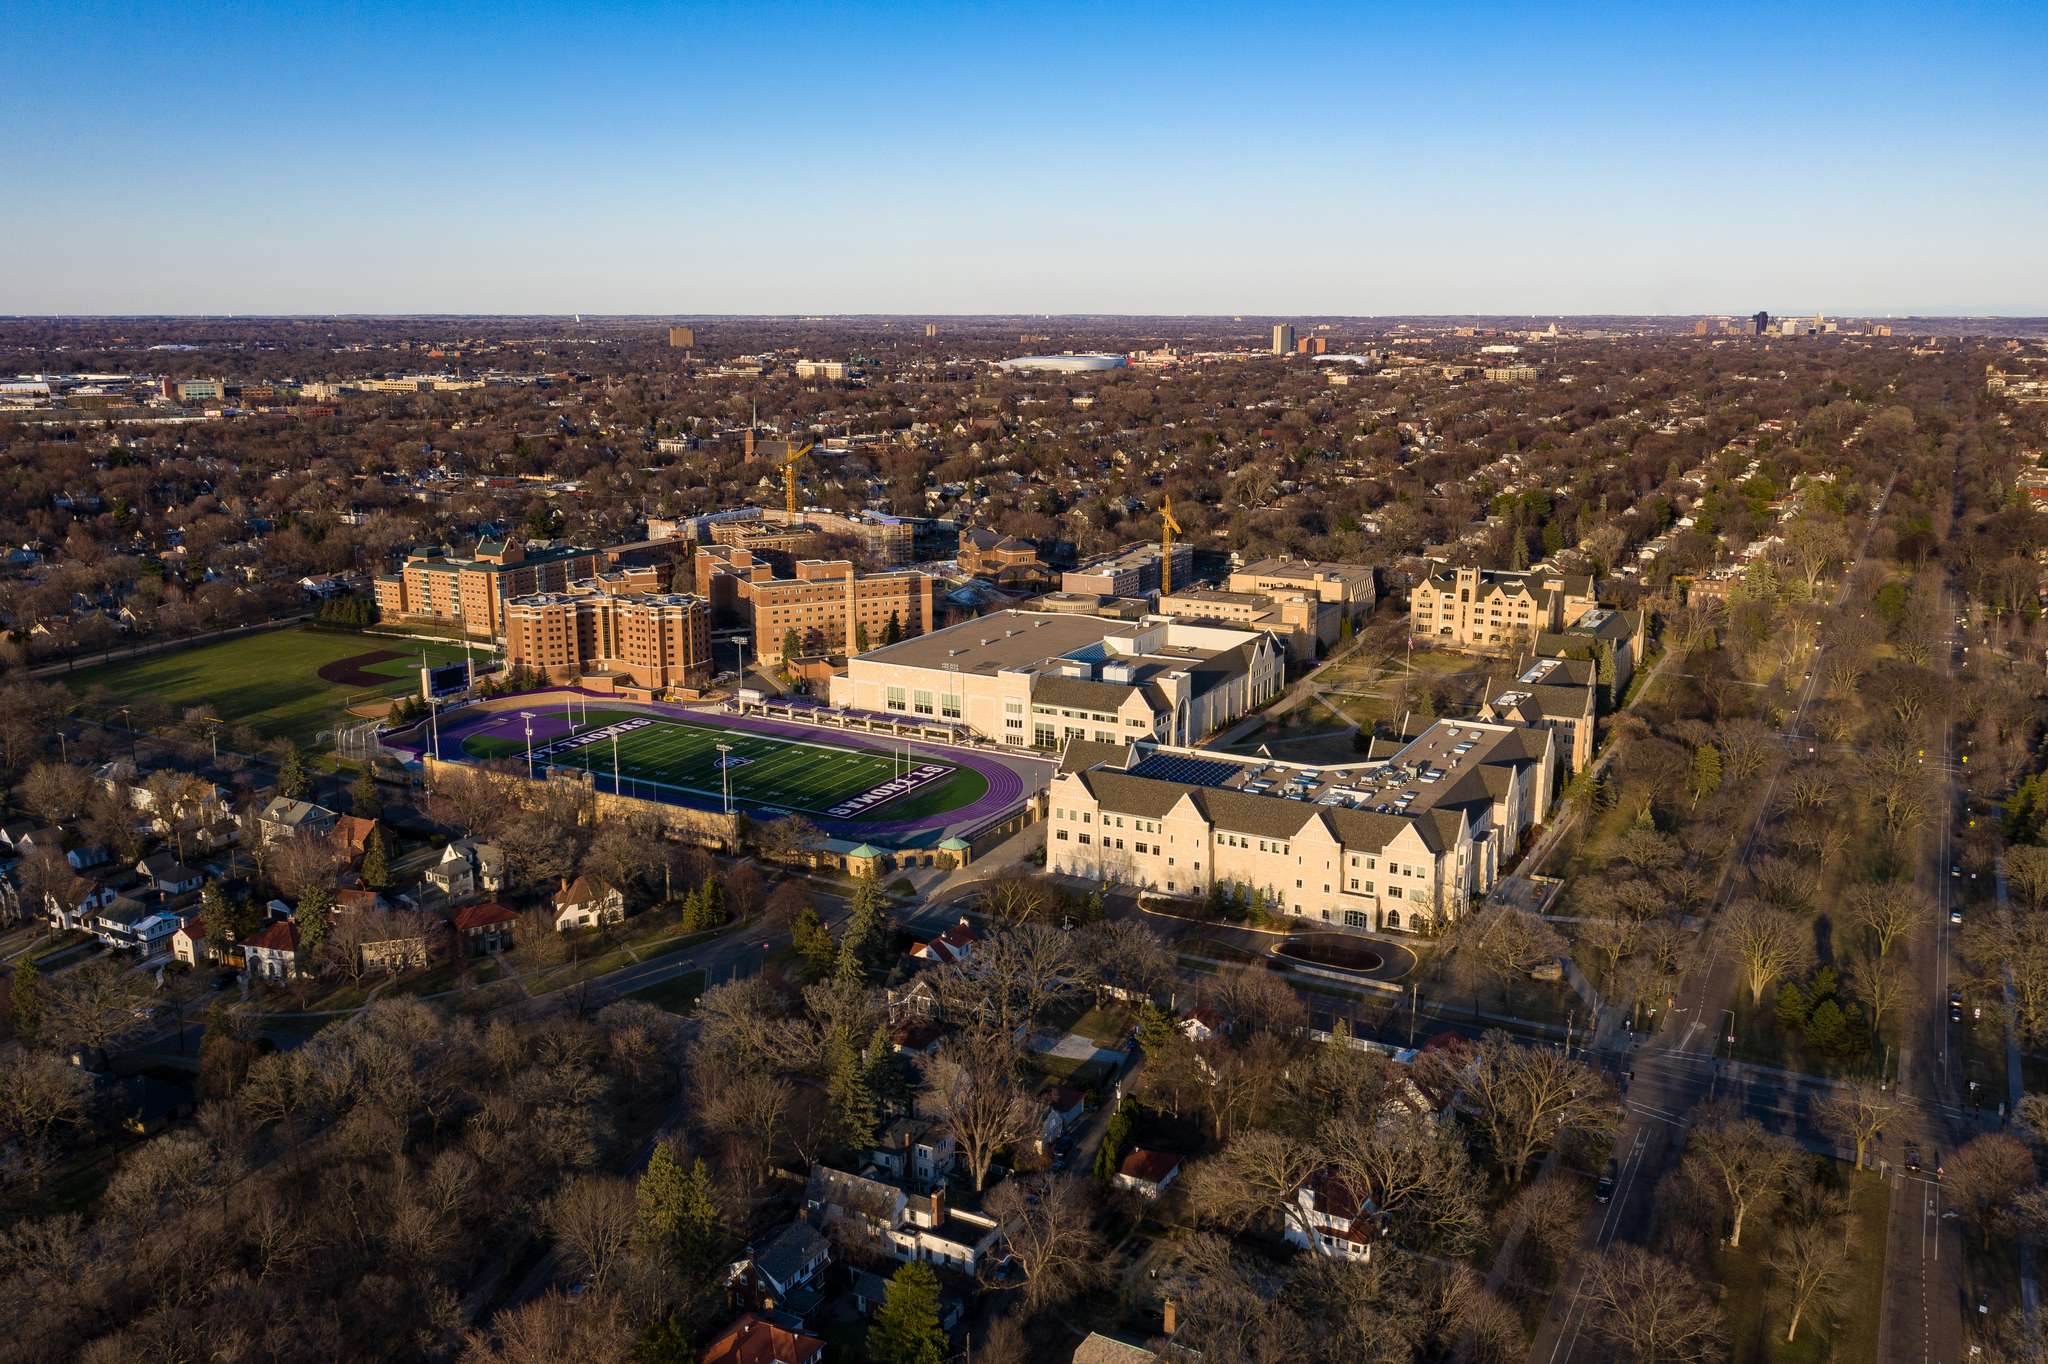 aerial photo of the St. Thomas campus with O'Shaughnessy Stadium and Anderson Student Center in the foreground